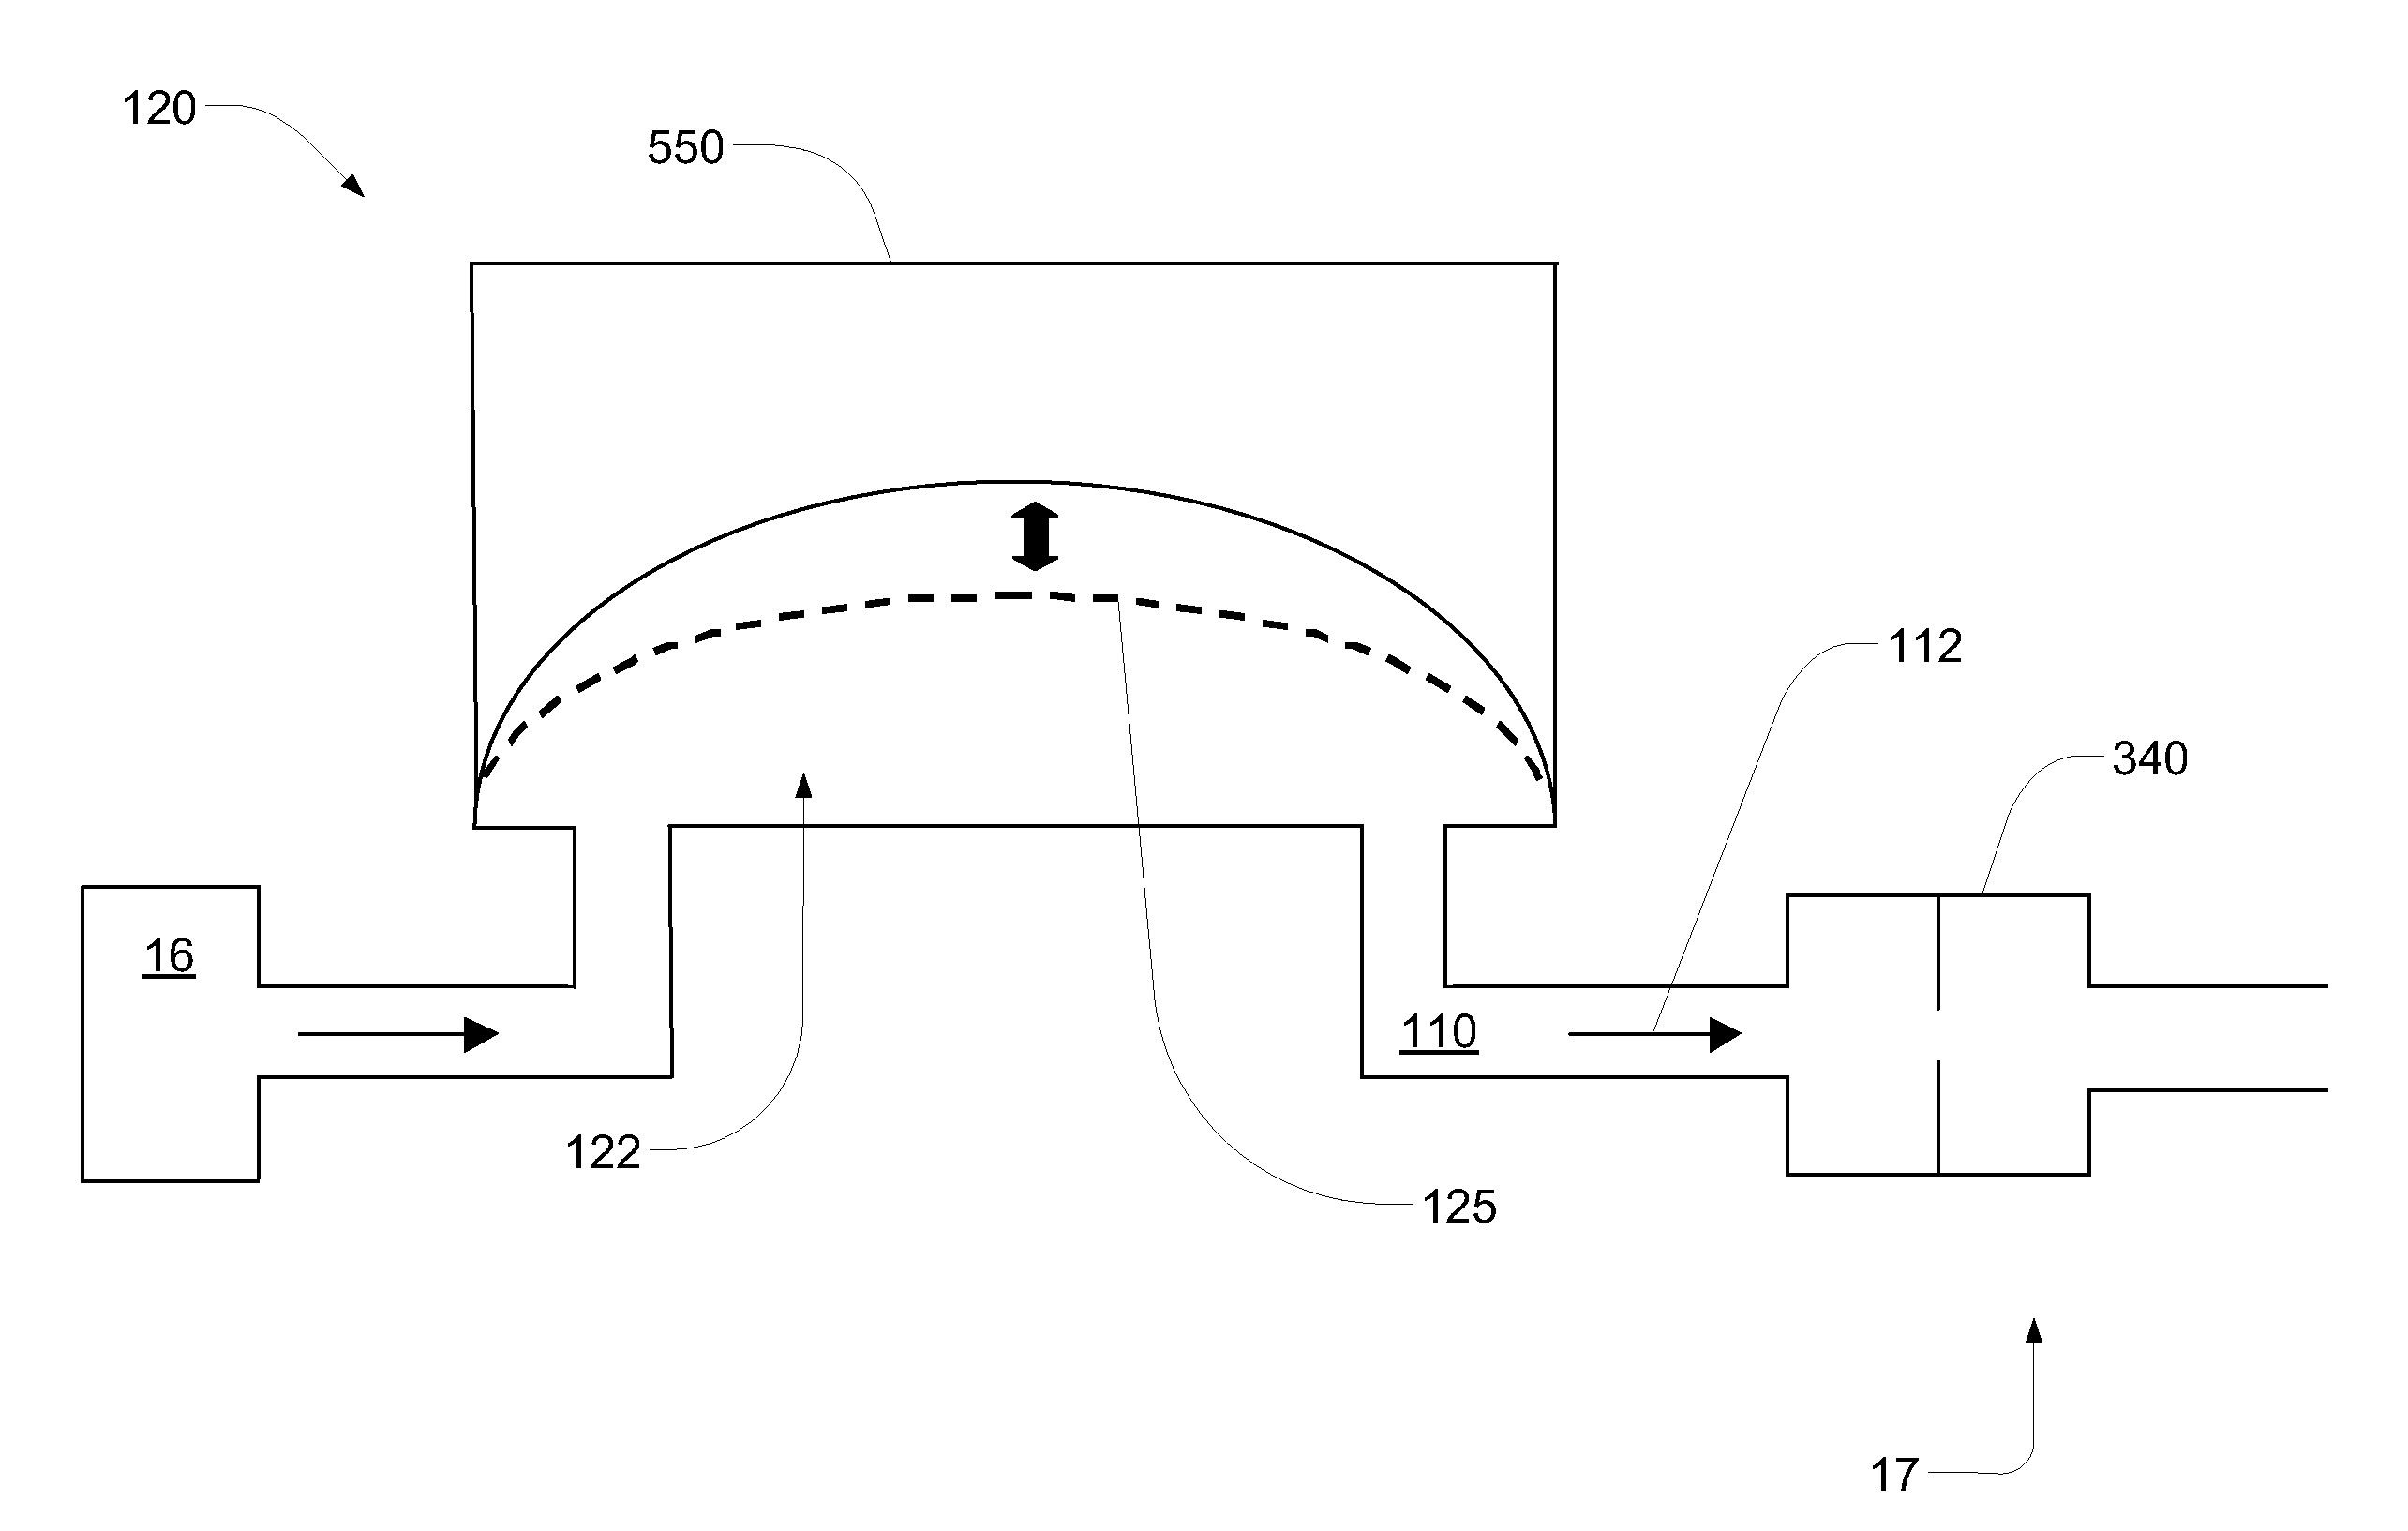 Pumping fluid delivery systems and methods using force application assembly